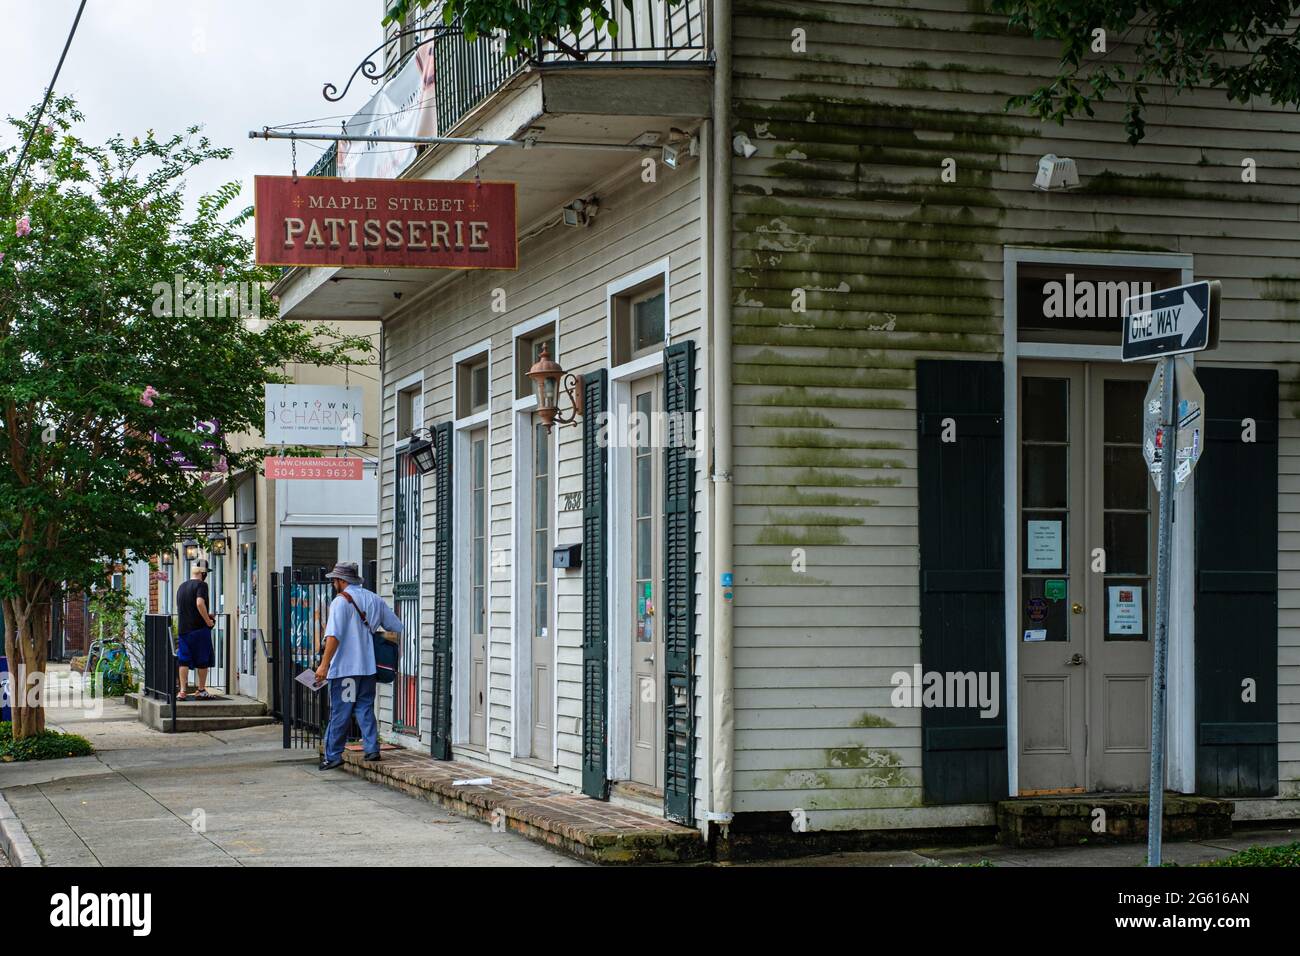 NEW ORLEANS, LA, USA - JUNE 22, 2021: Maple Street Patisserie, mail carrier and adjacent businesses on Maple Street in New Orleans Stock Photo